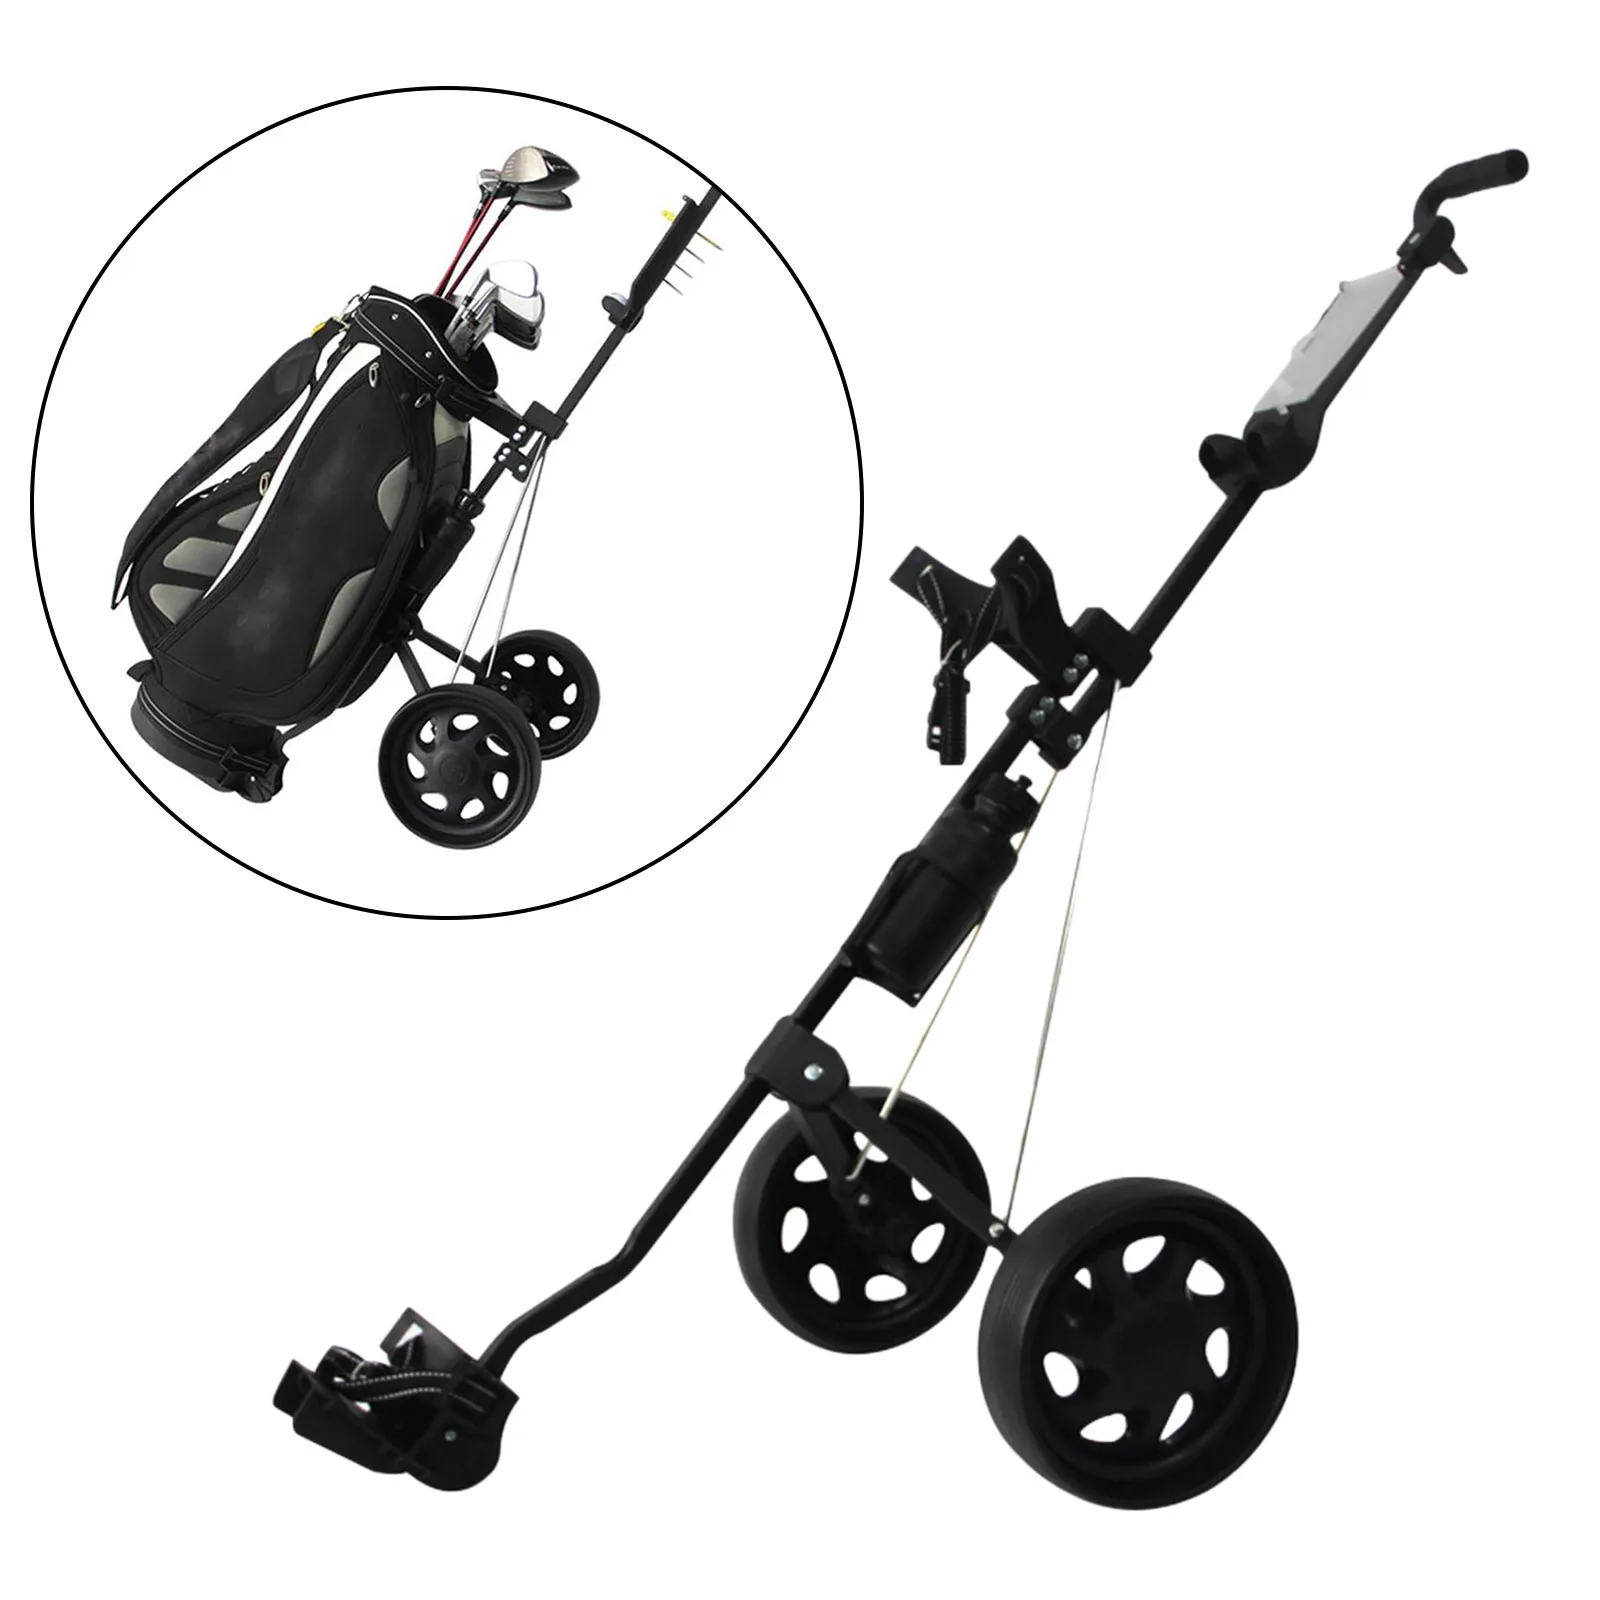 Golf Trolley Professional Folding Golf Bag Trolley Outdoor Sports Multifunctional Range Supplies Push Pull Golf Cart for Gifts